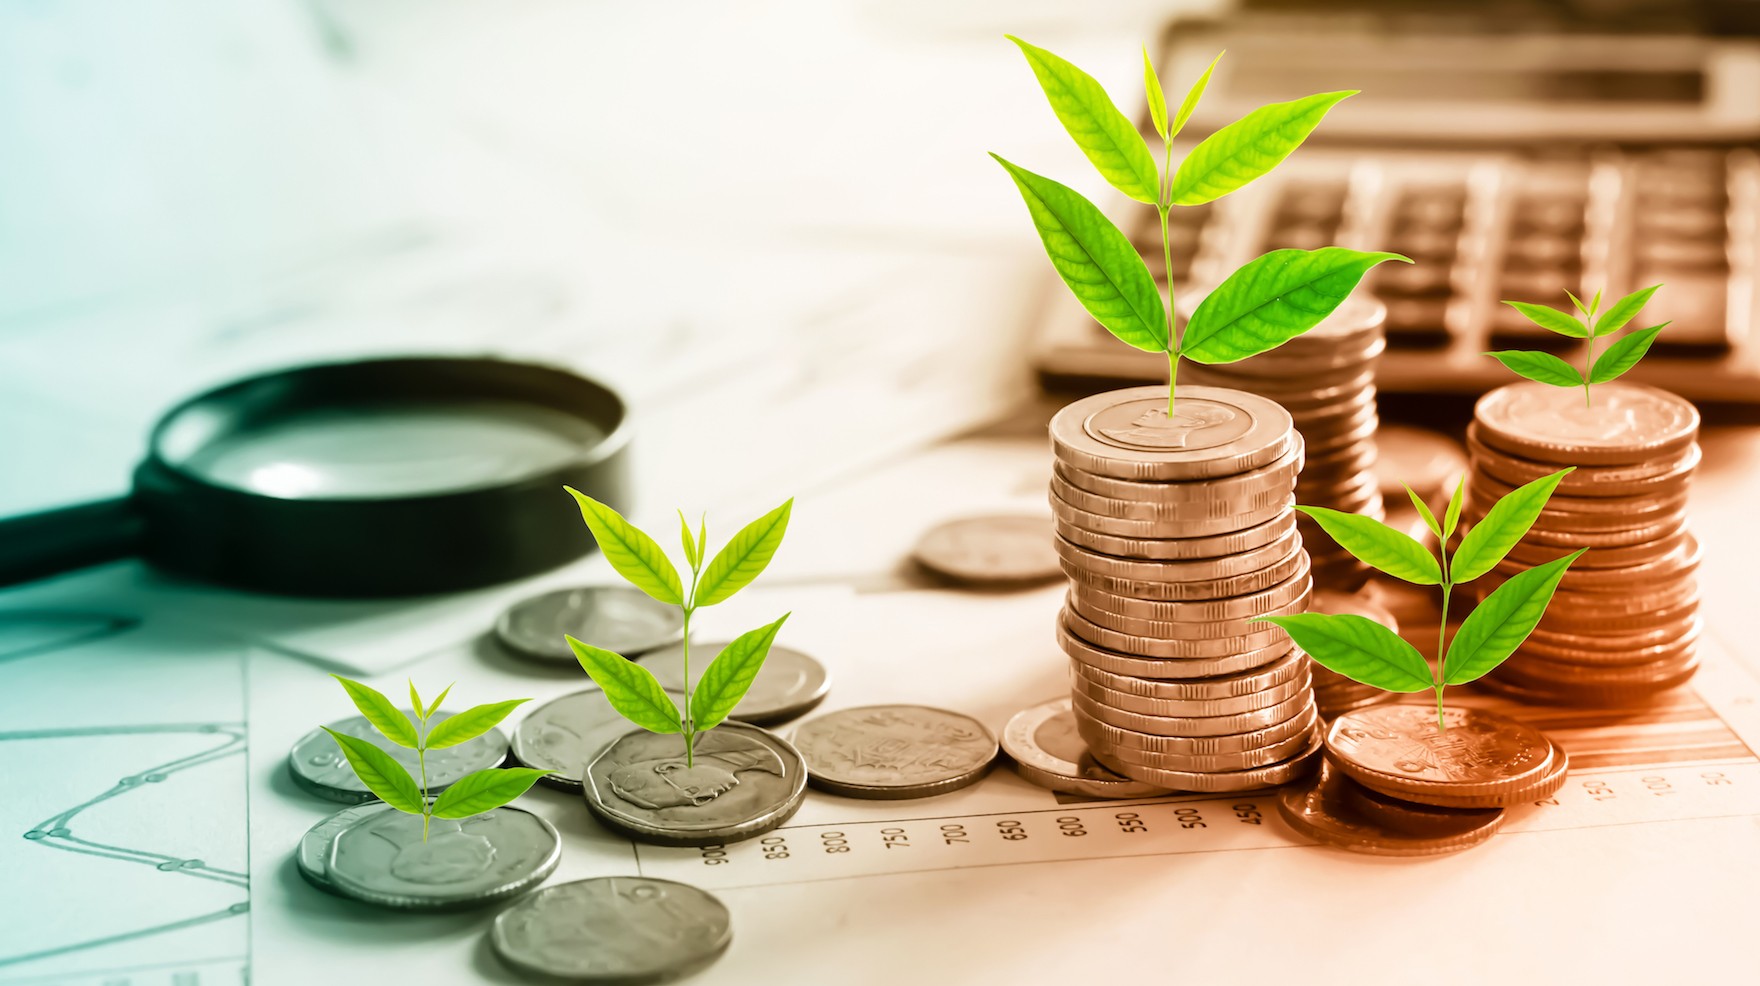 tree growing on coins idea for growing business concept